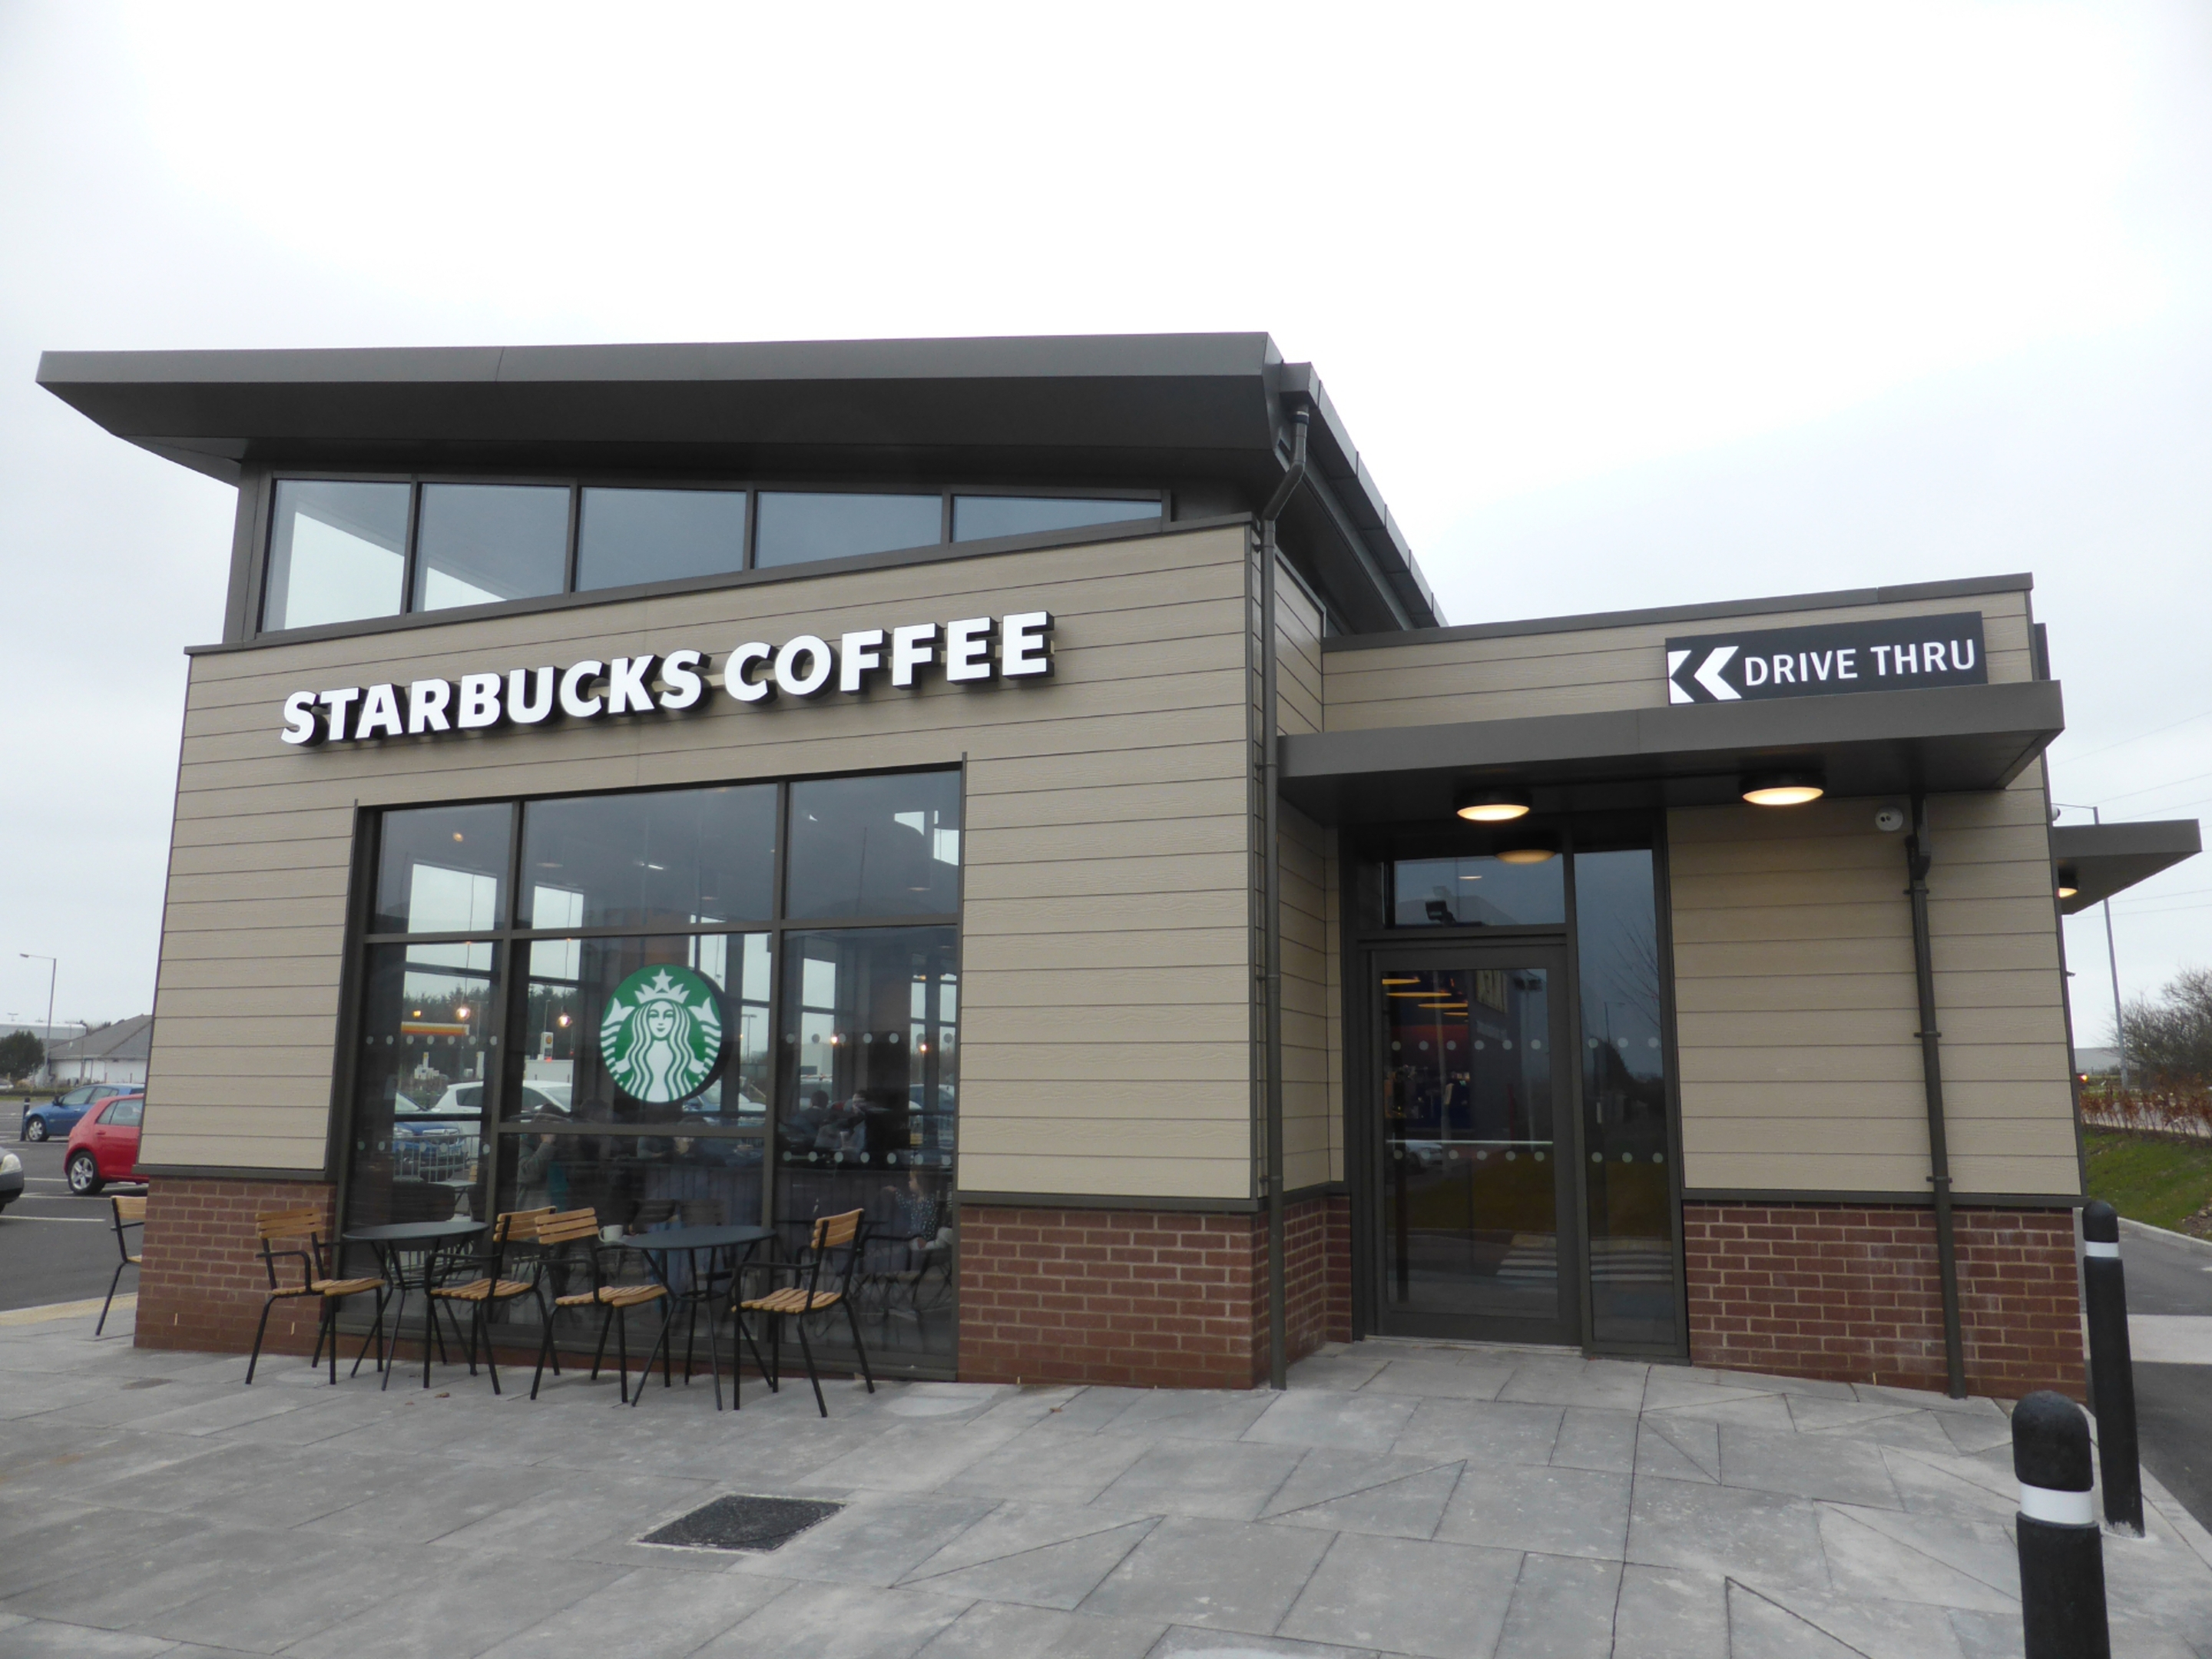 A Starbucks drive-thru, similar to the one proposed for Kirkcaldy.